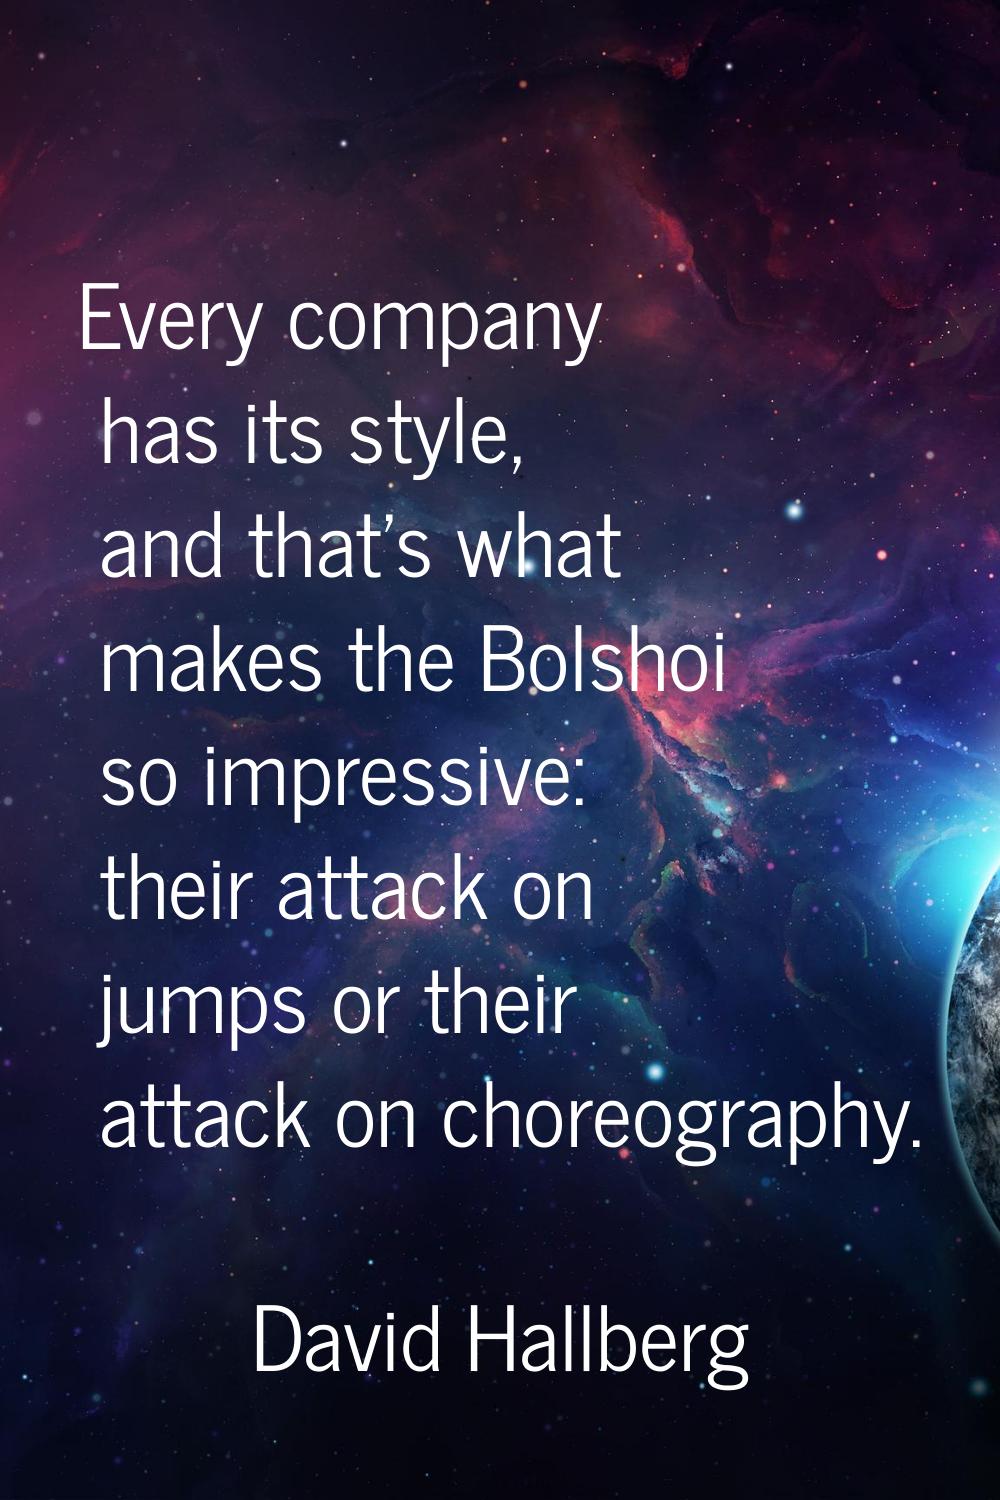 Every company has its style, and that's what makes the Bolshoi so impressive: their attack on jumps